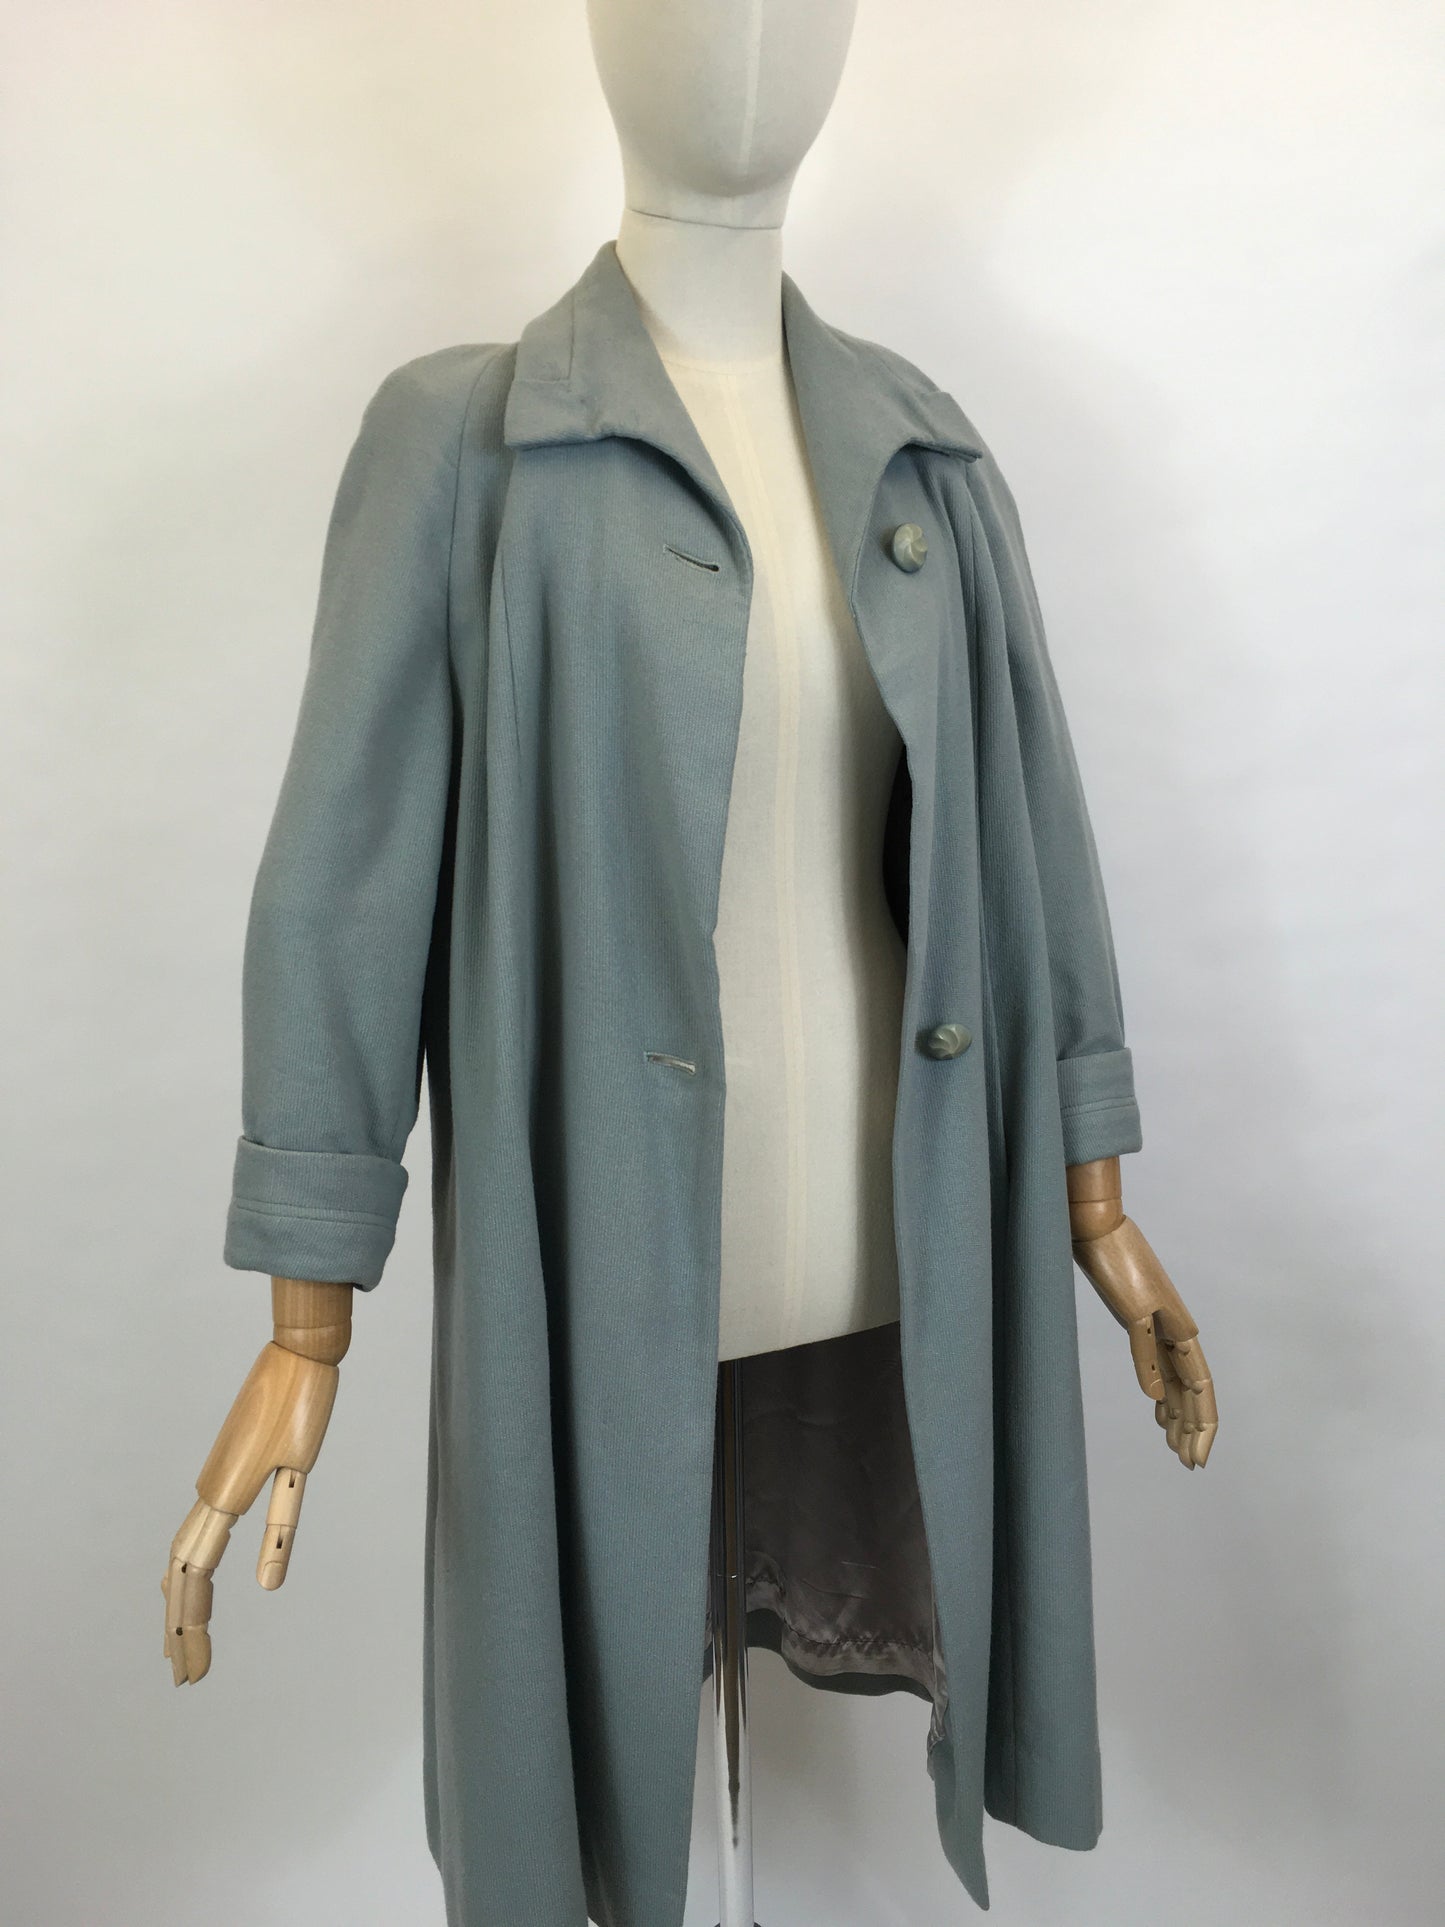 Original 1950’s Darling Pale Blue Swing Coat - With A Classic Easy to Wear 50’s Silhouette